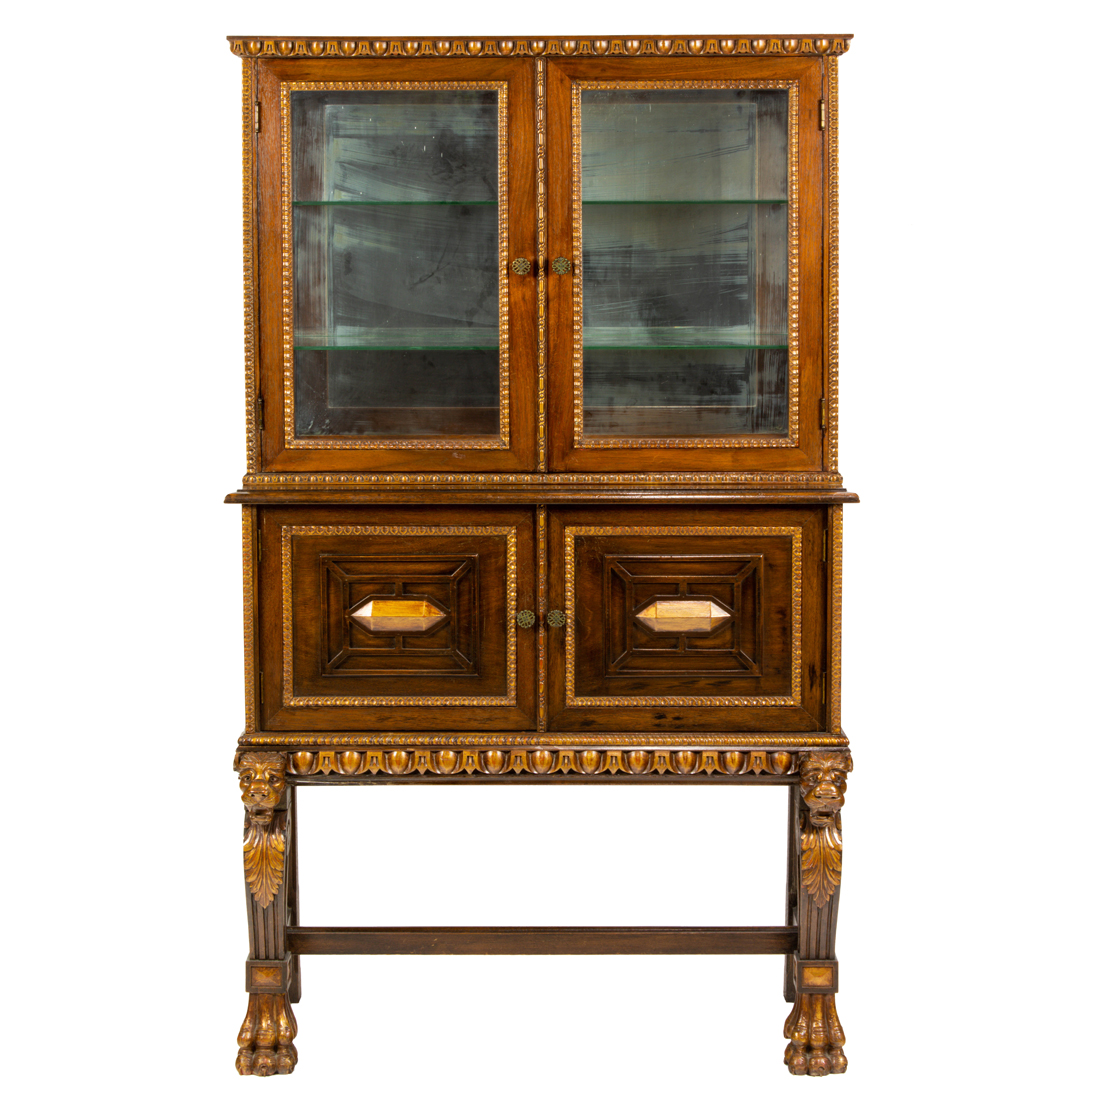 A SPANISH REVIVAL DISPLAY CASE 3a1931